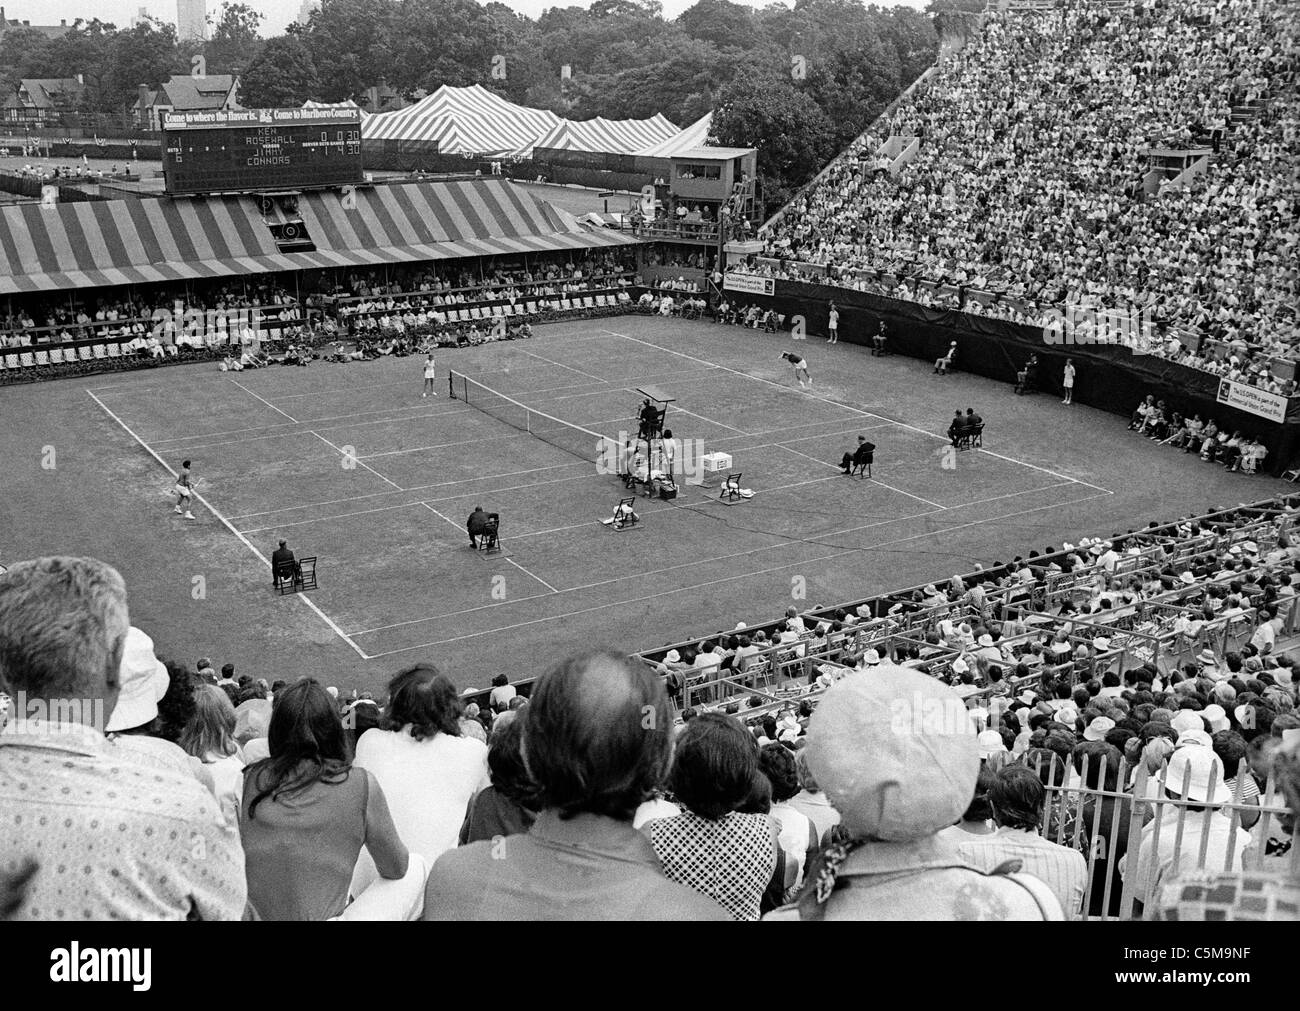 West Side Tennis Club, 1974 US Open Tennis Championship Stock Photo